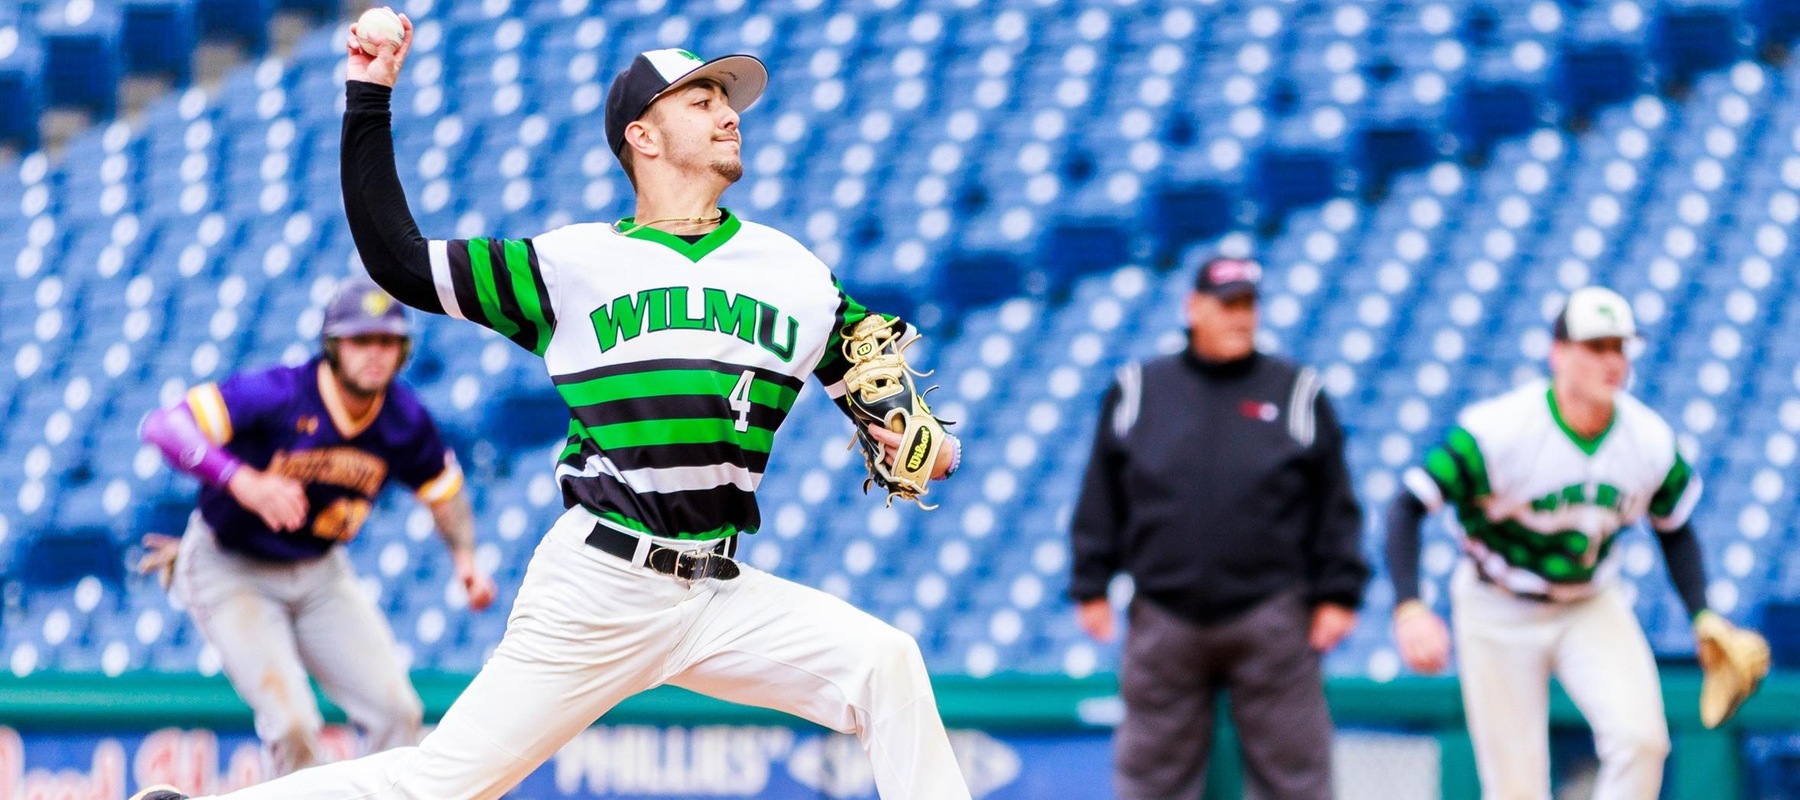 File photo of Kyle Maxwell who tossed a complete game shutout against Post in the CACC Tournament. Copyright 2022; Wilmington University. All rights reserved. Photo by Chris Vitale. April 19, 2022 vs. West Chester at Citizens Bank Park.